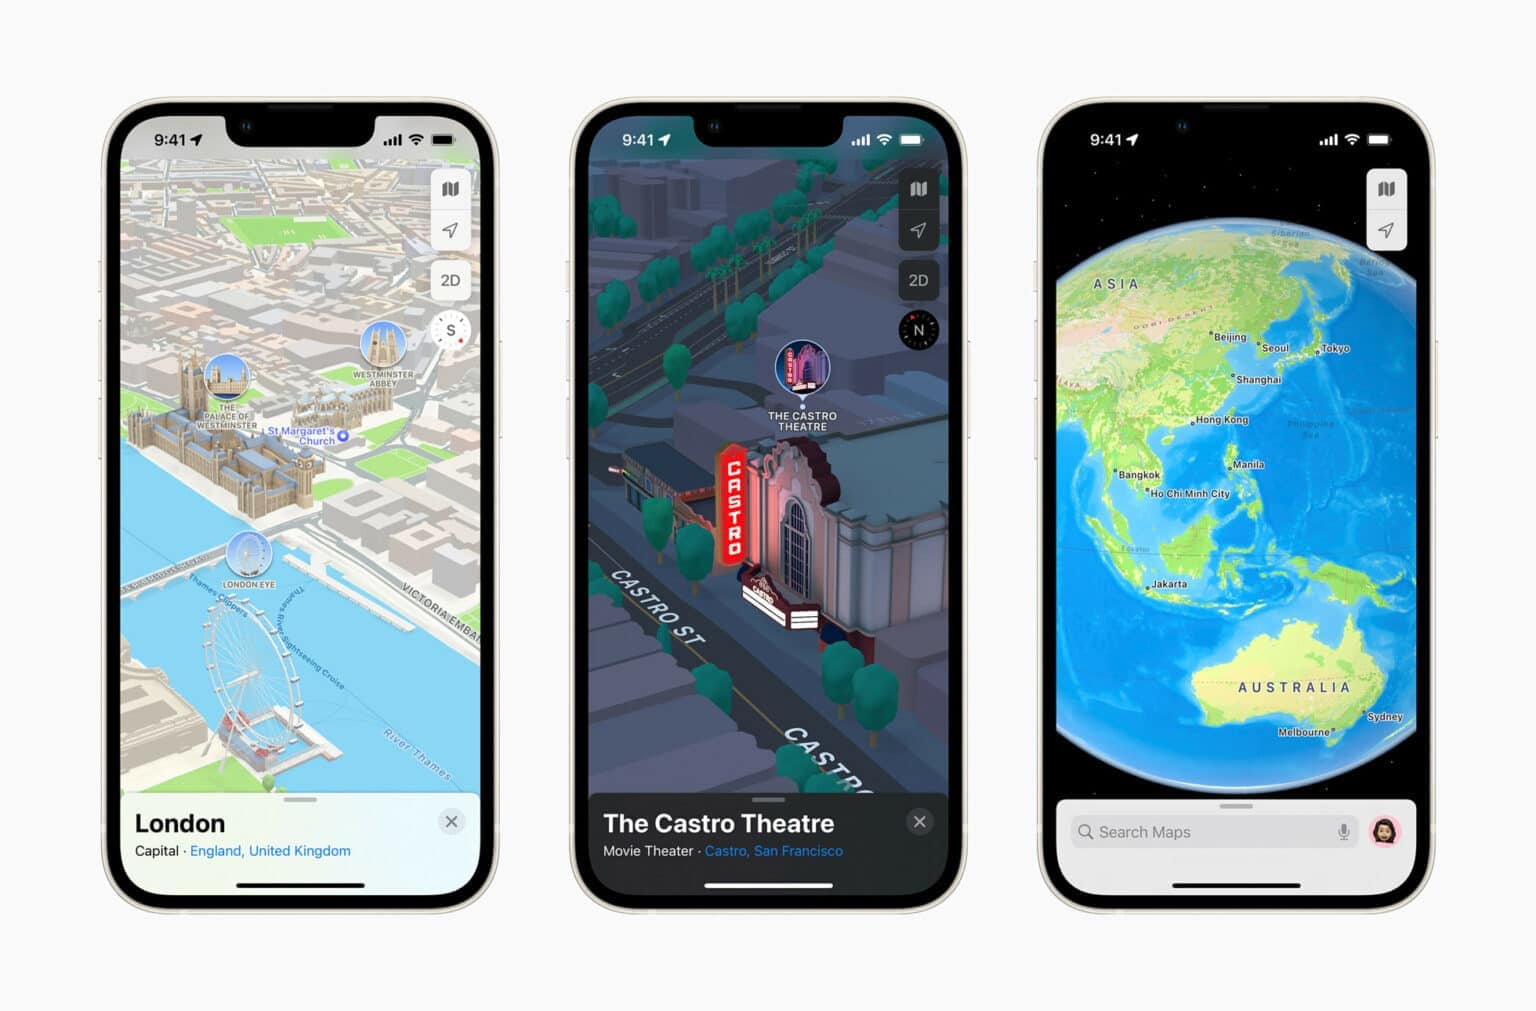 Apple Maps' use of 3D imagery led the way, but in other ways it trailed Google Maps.